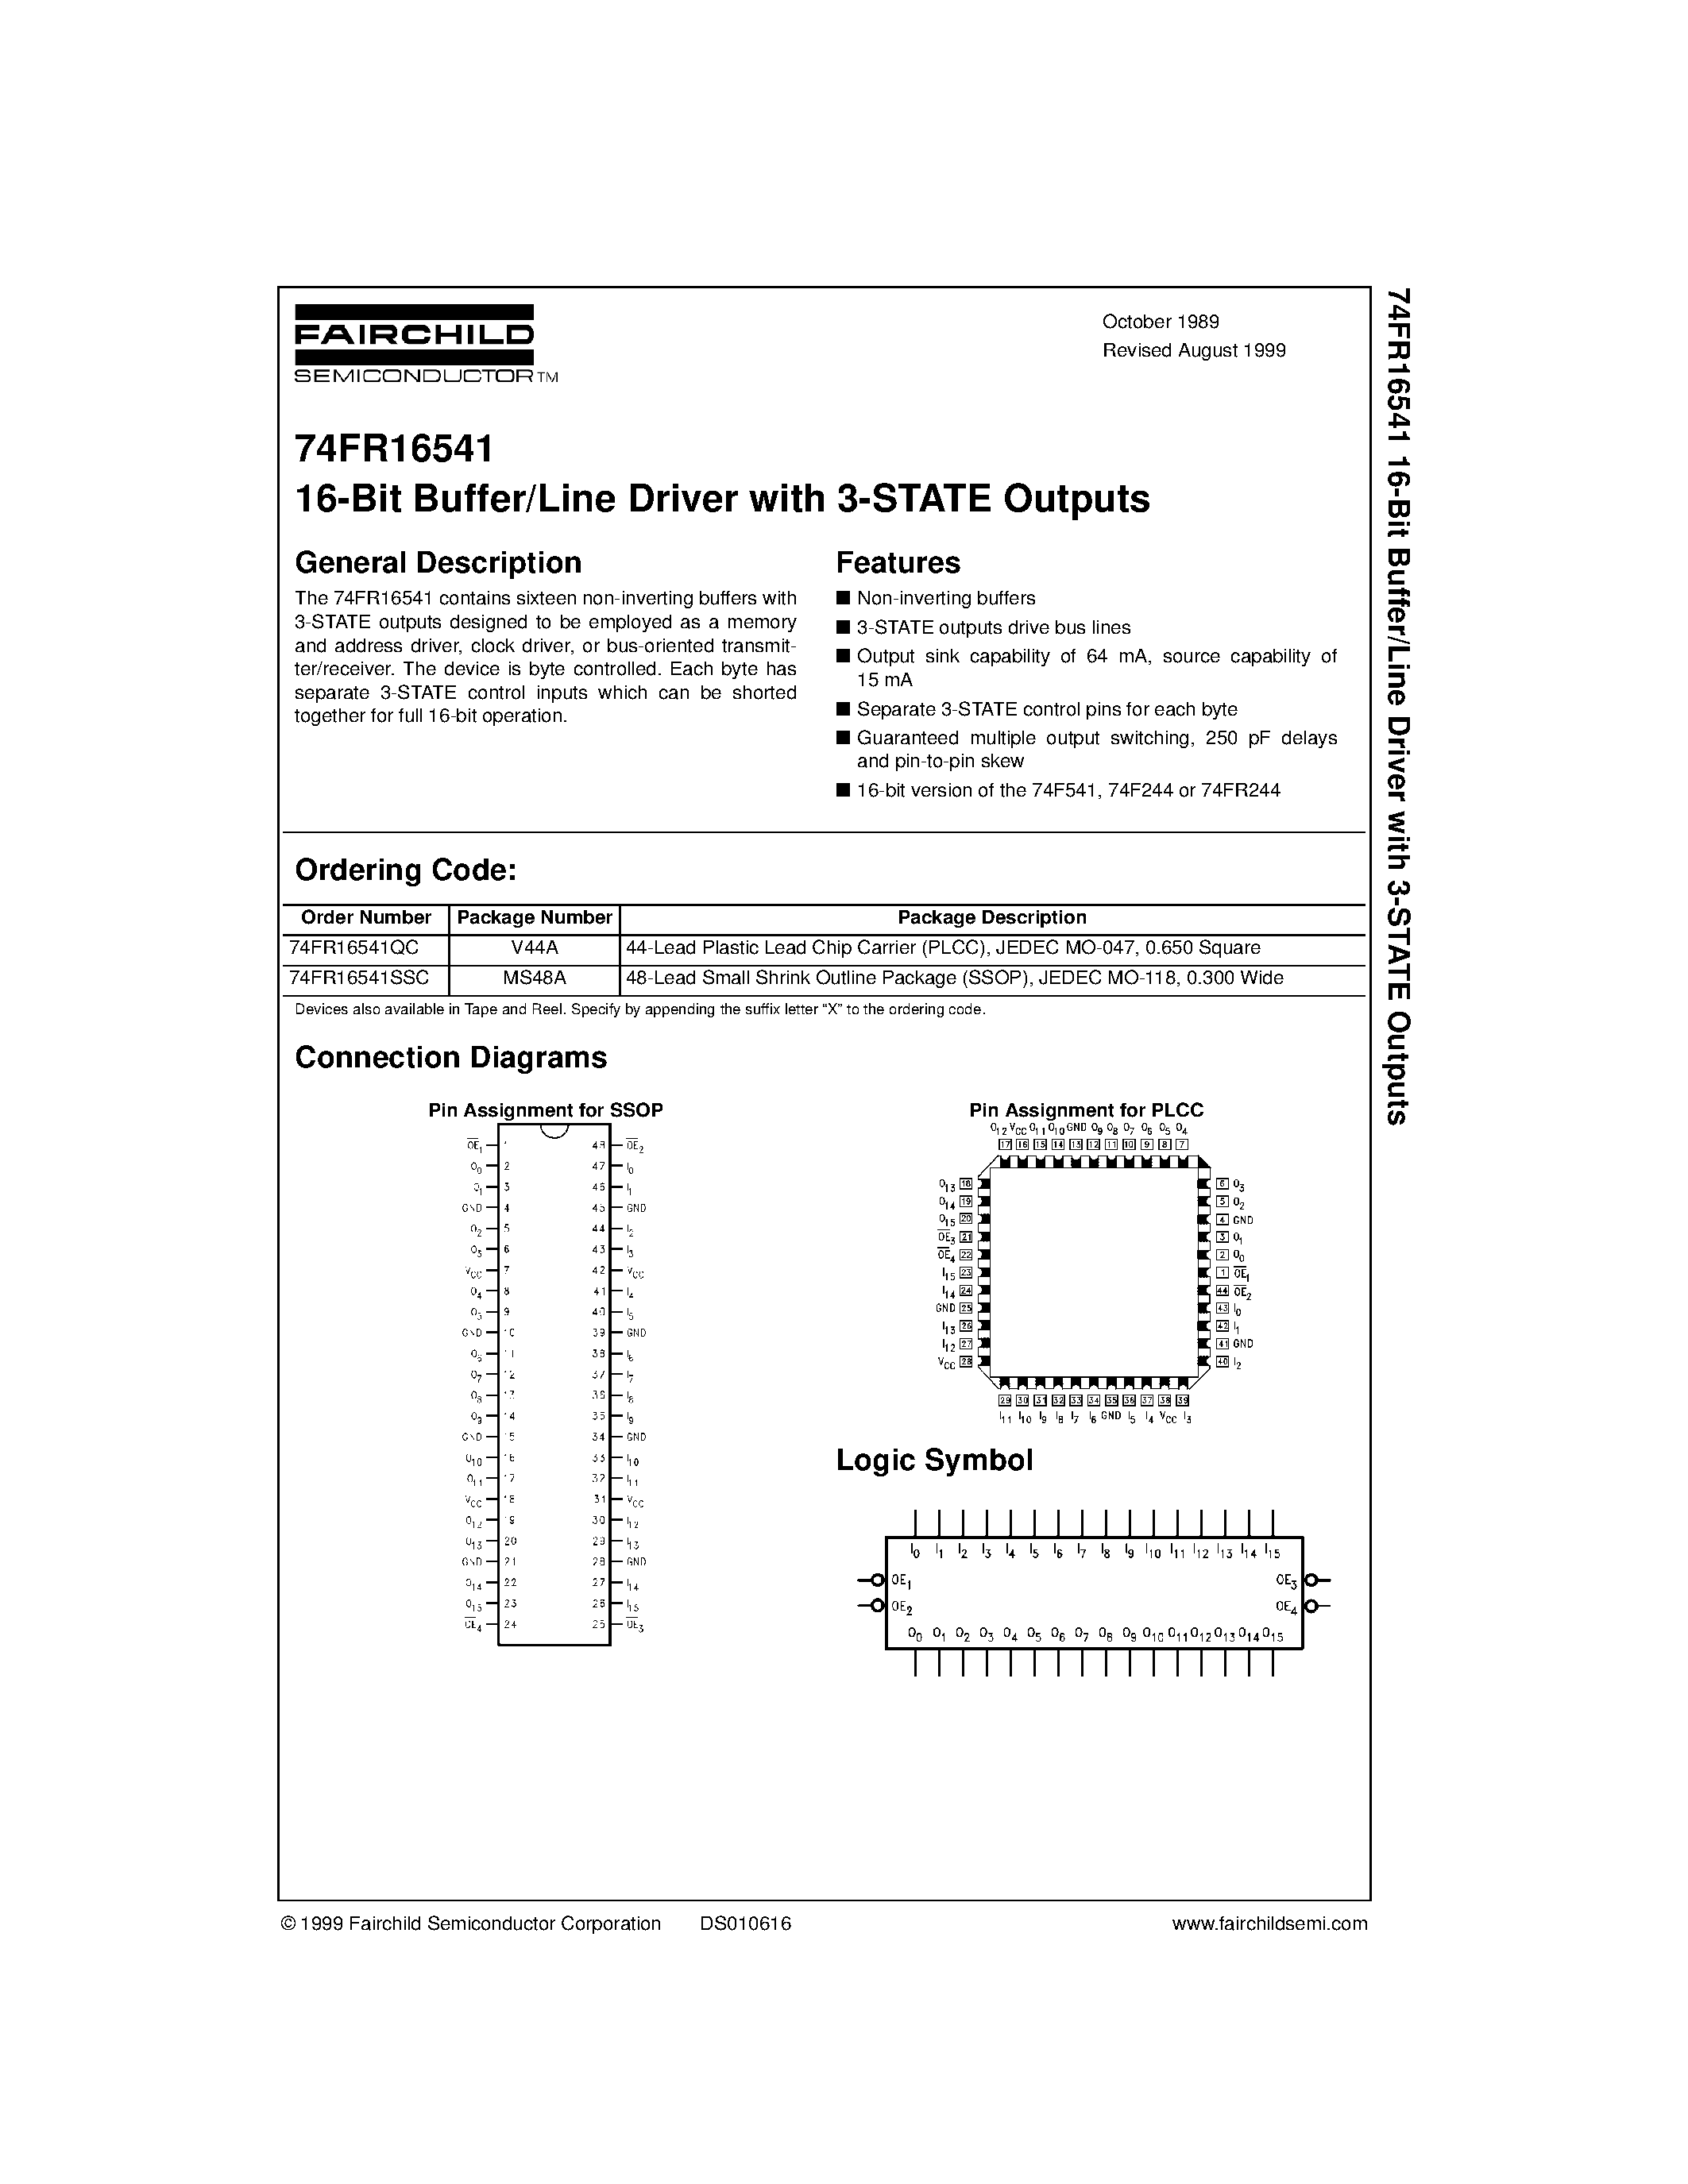 Datasheet 74FR16541 - 16-Bit Buffer/Line Driver with 3-STATE Outputs page 1